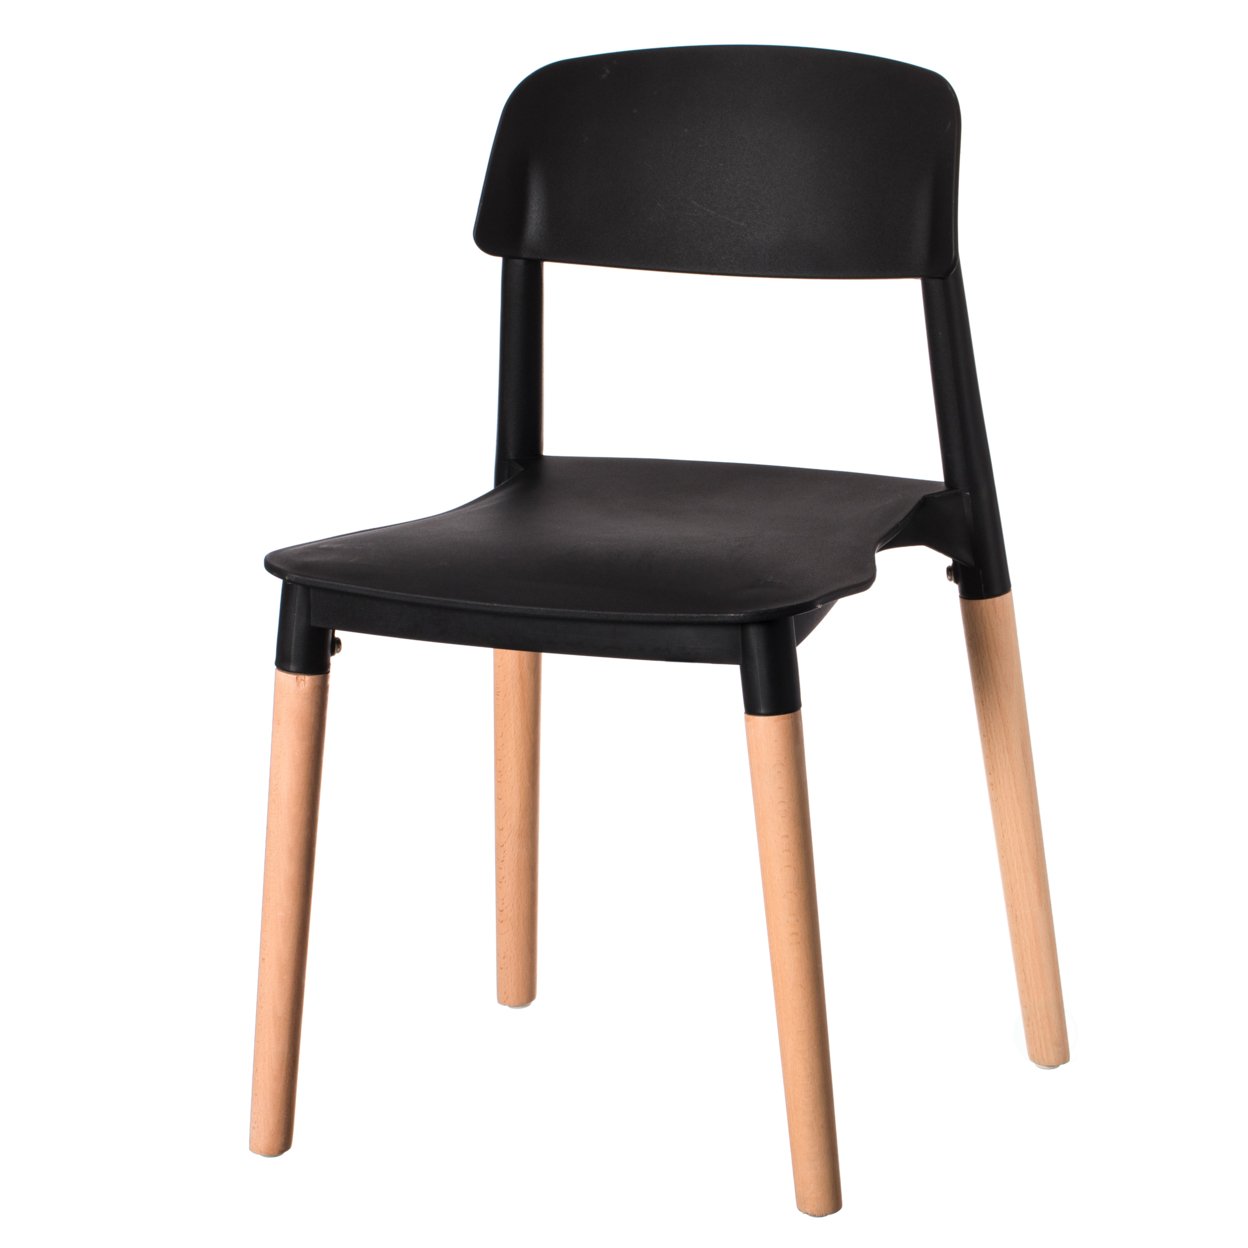 Modern Plastic Dining Chair Open Back With Beech Wood Legs - Single Black